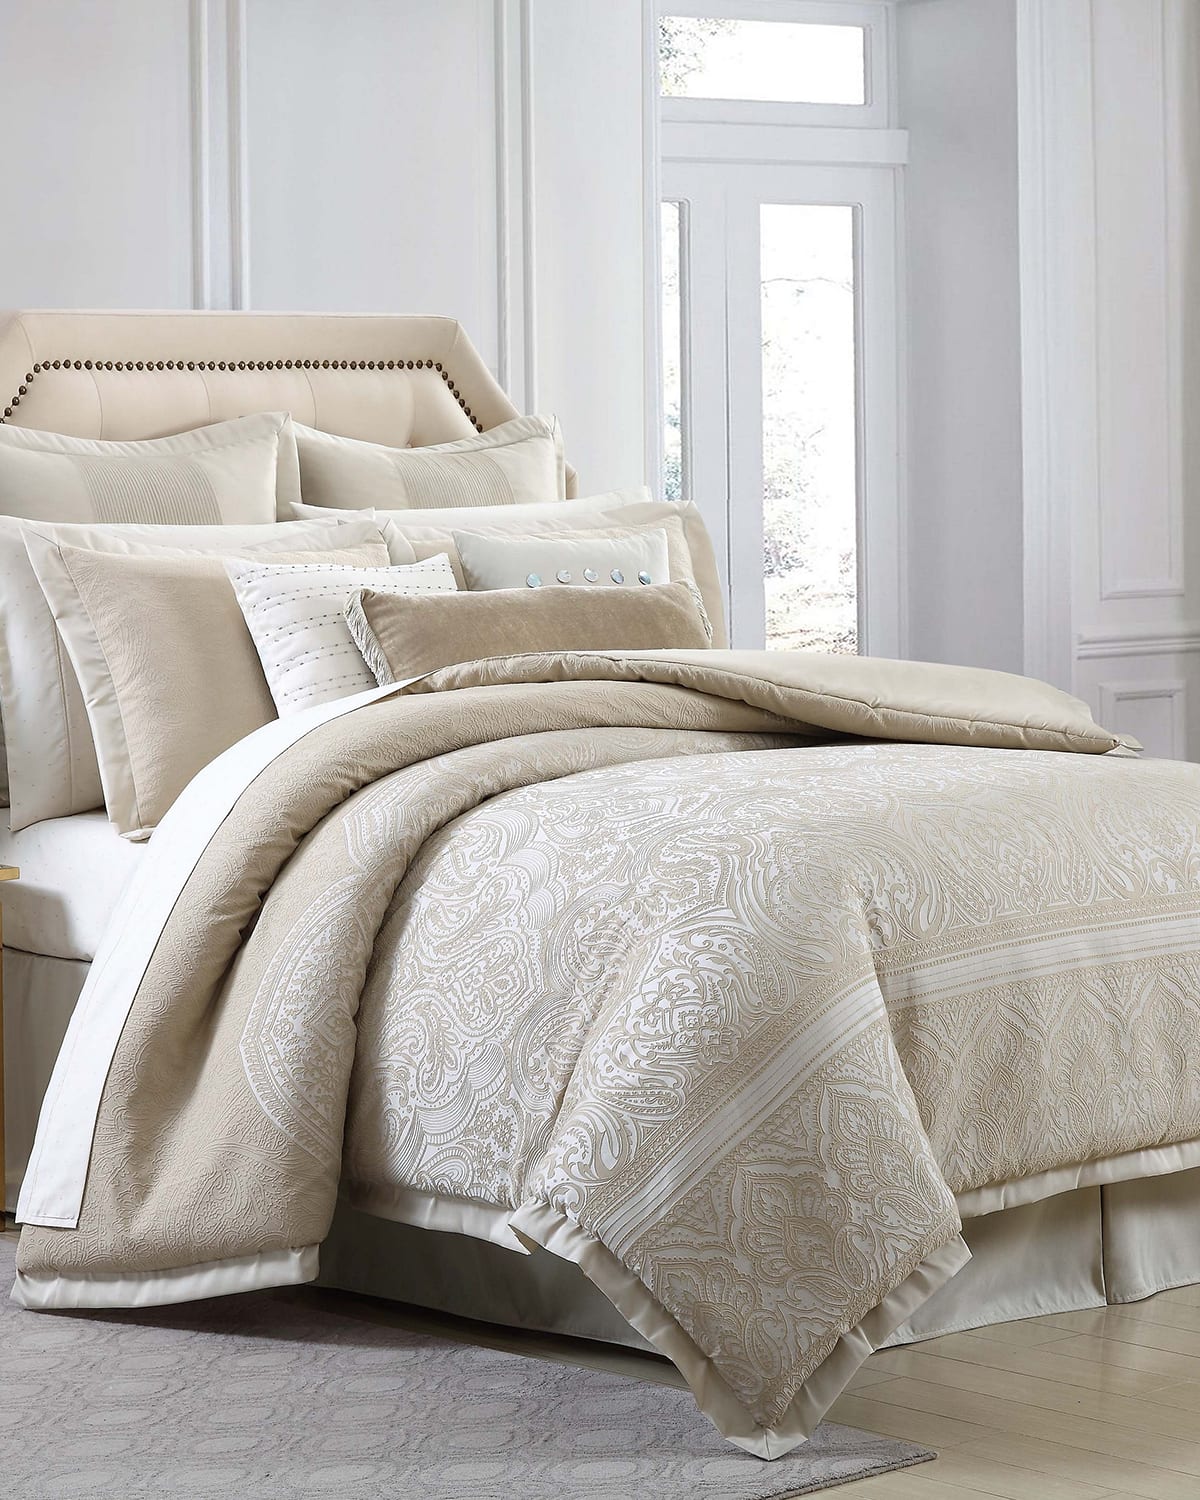 Charisma Bellissimo Bedding & Matching Items | Horchow